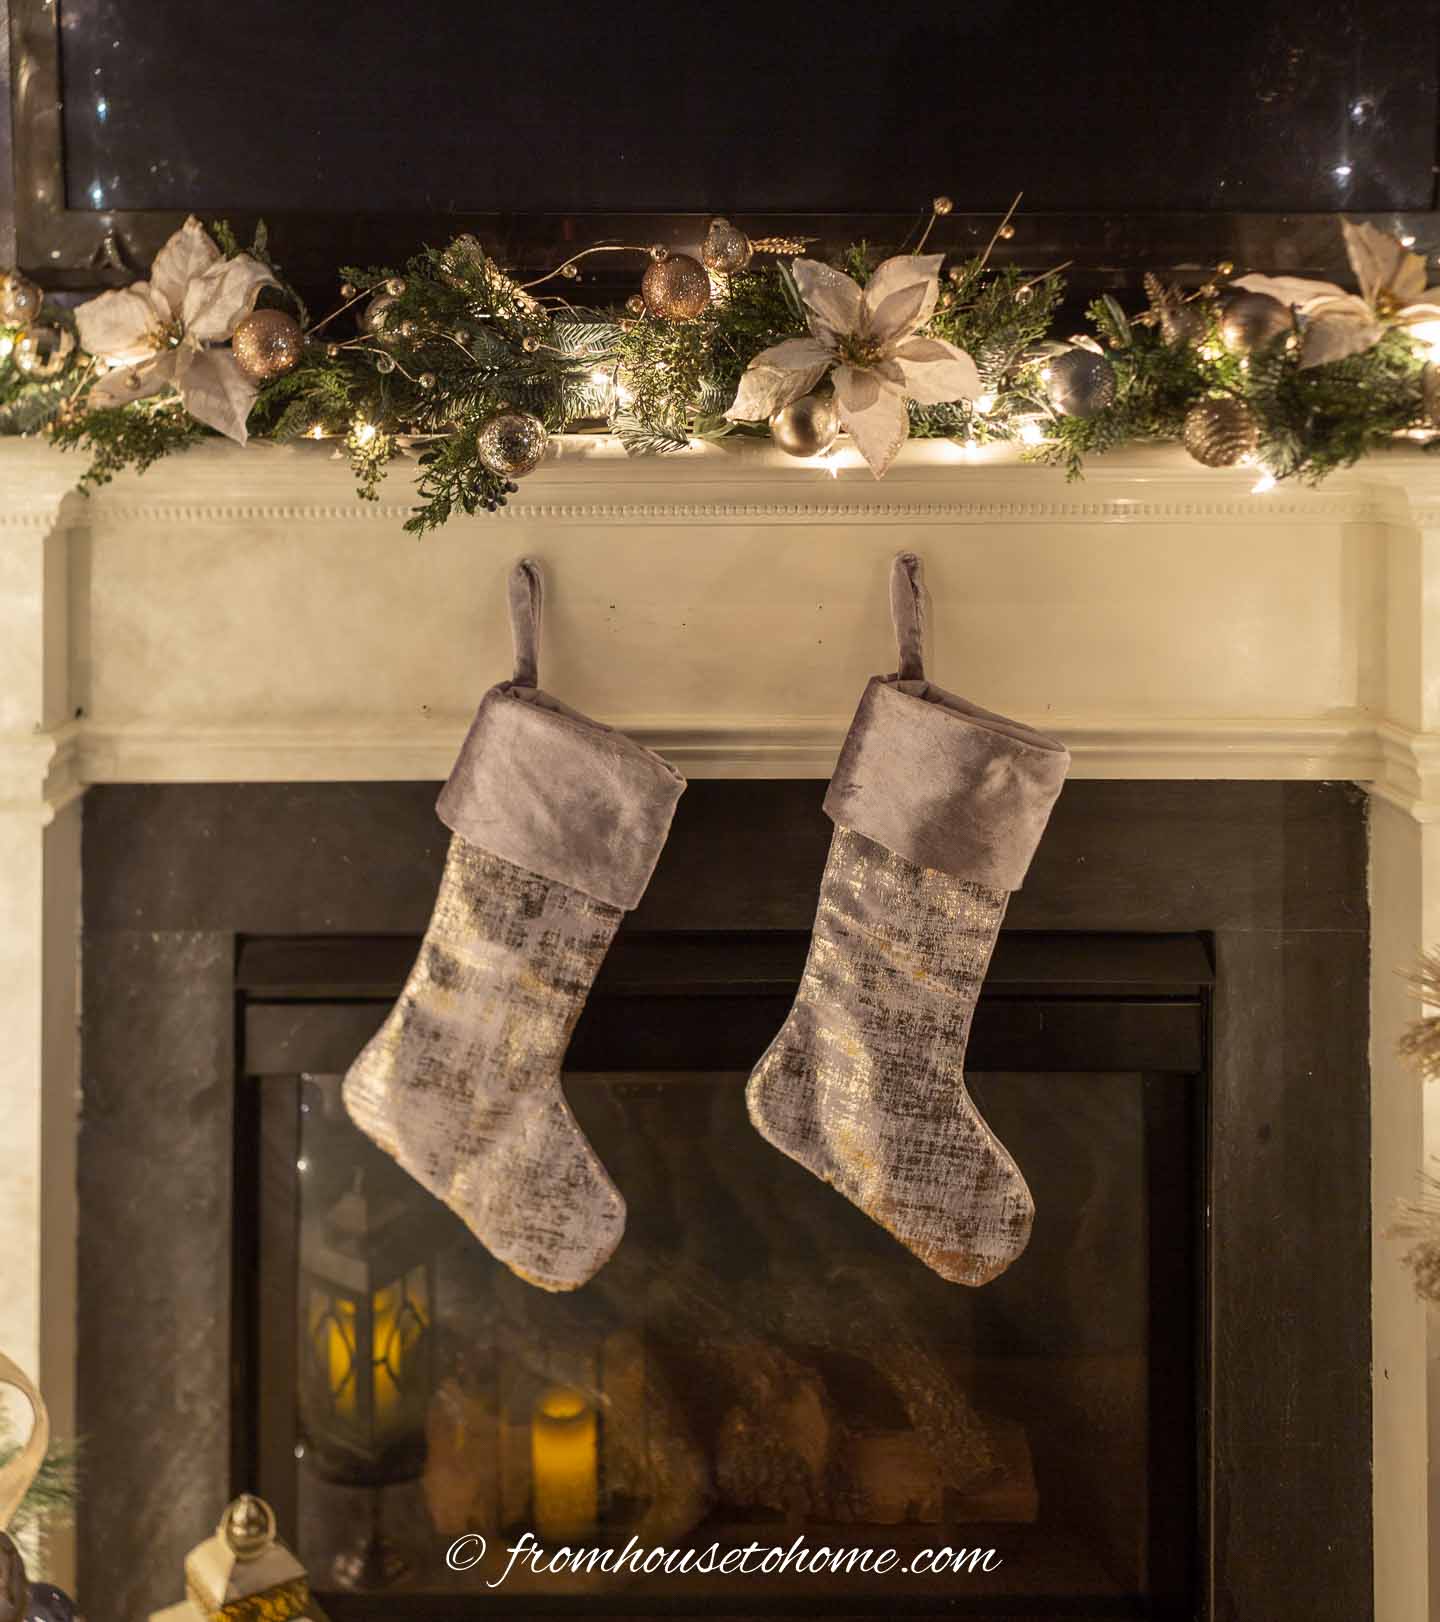 A fireplace mantel with a Christmas garland on top and 2 silver stockings hung on the front